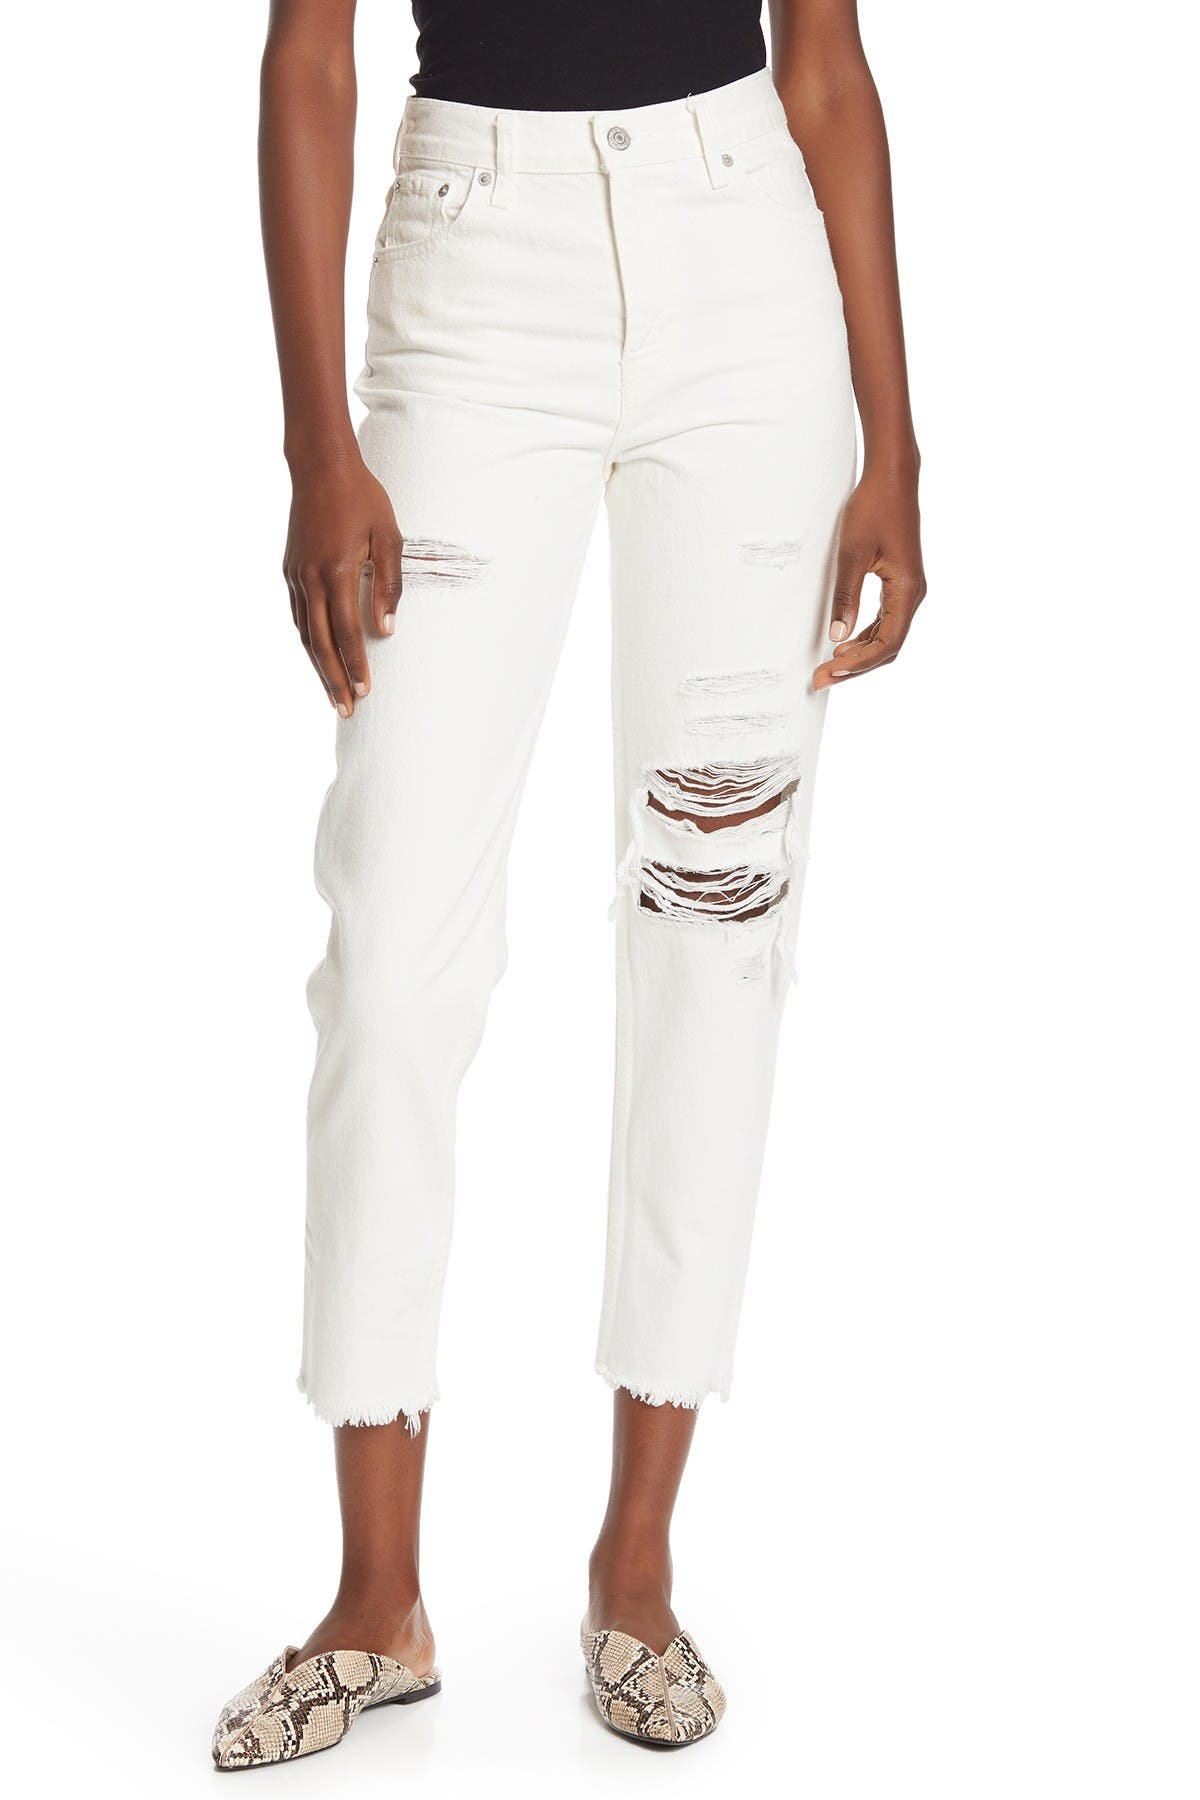 levis mom jeans white